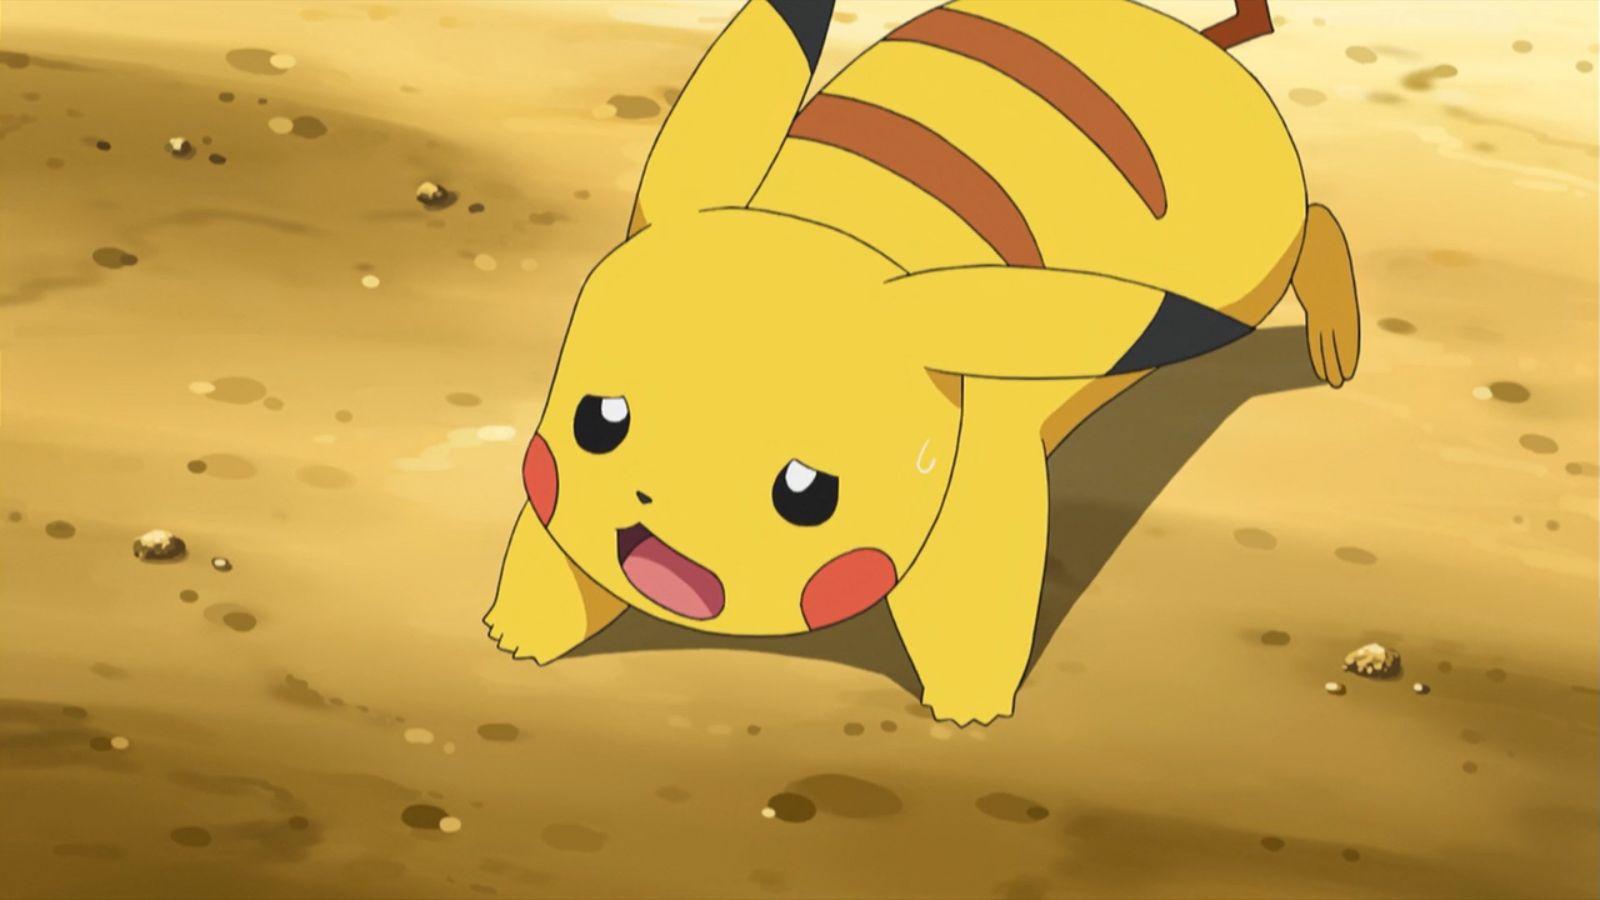 Confused Pikachu from Pokemon anime.